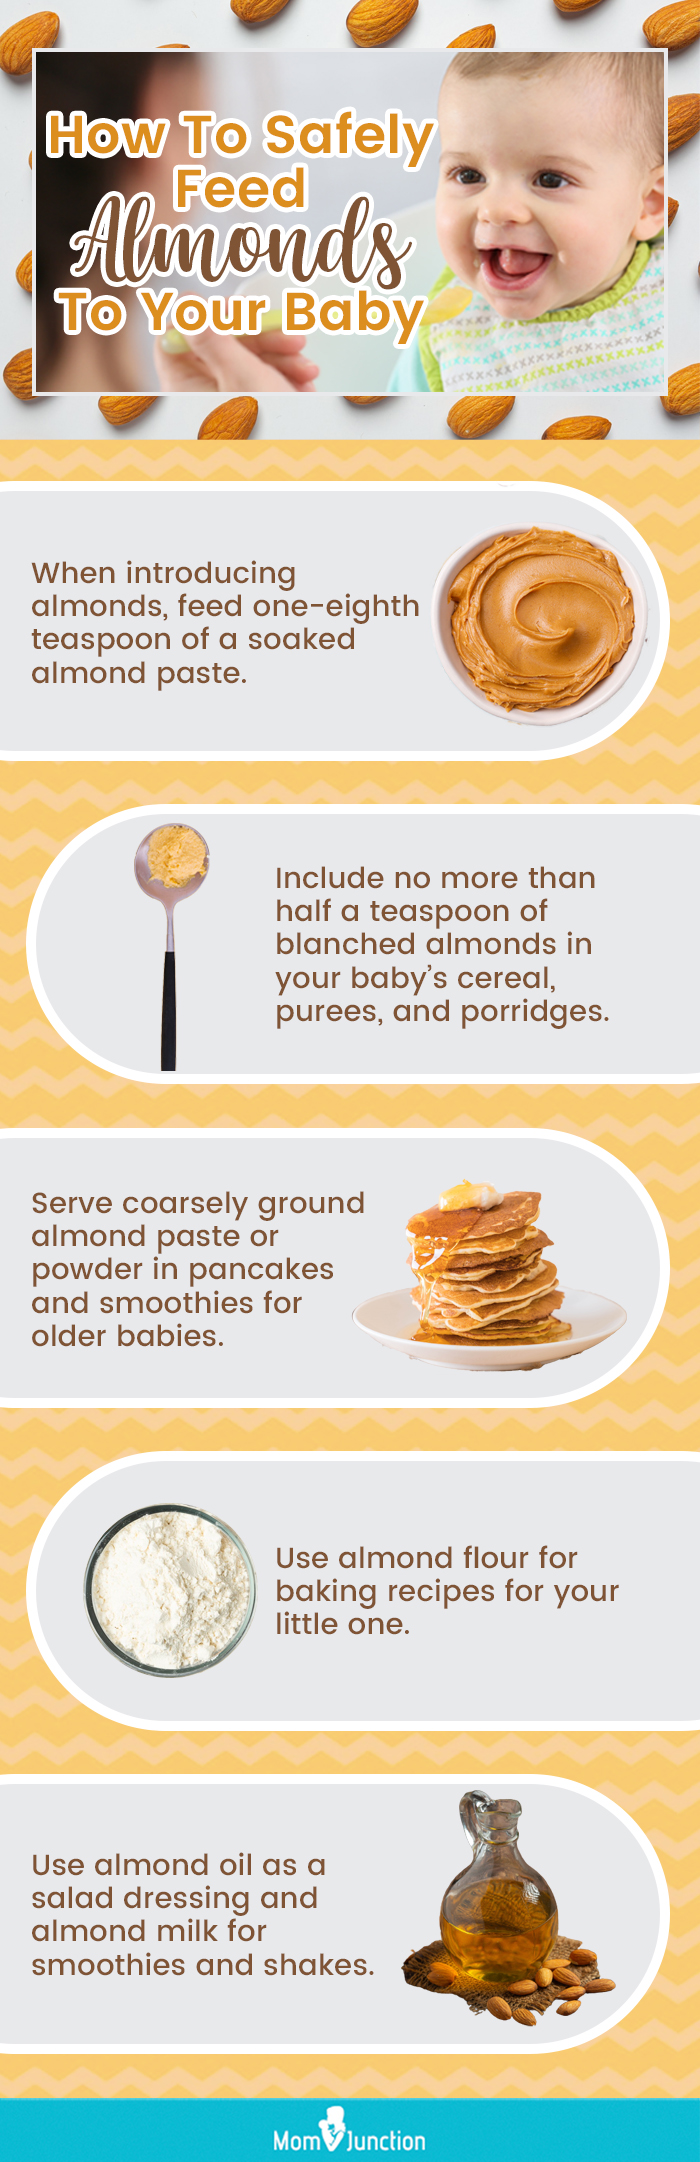 how to safely feed almonds to your baby (infographic)